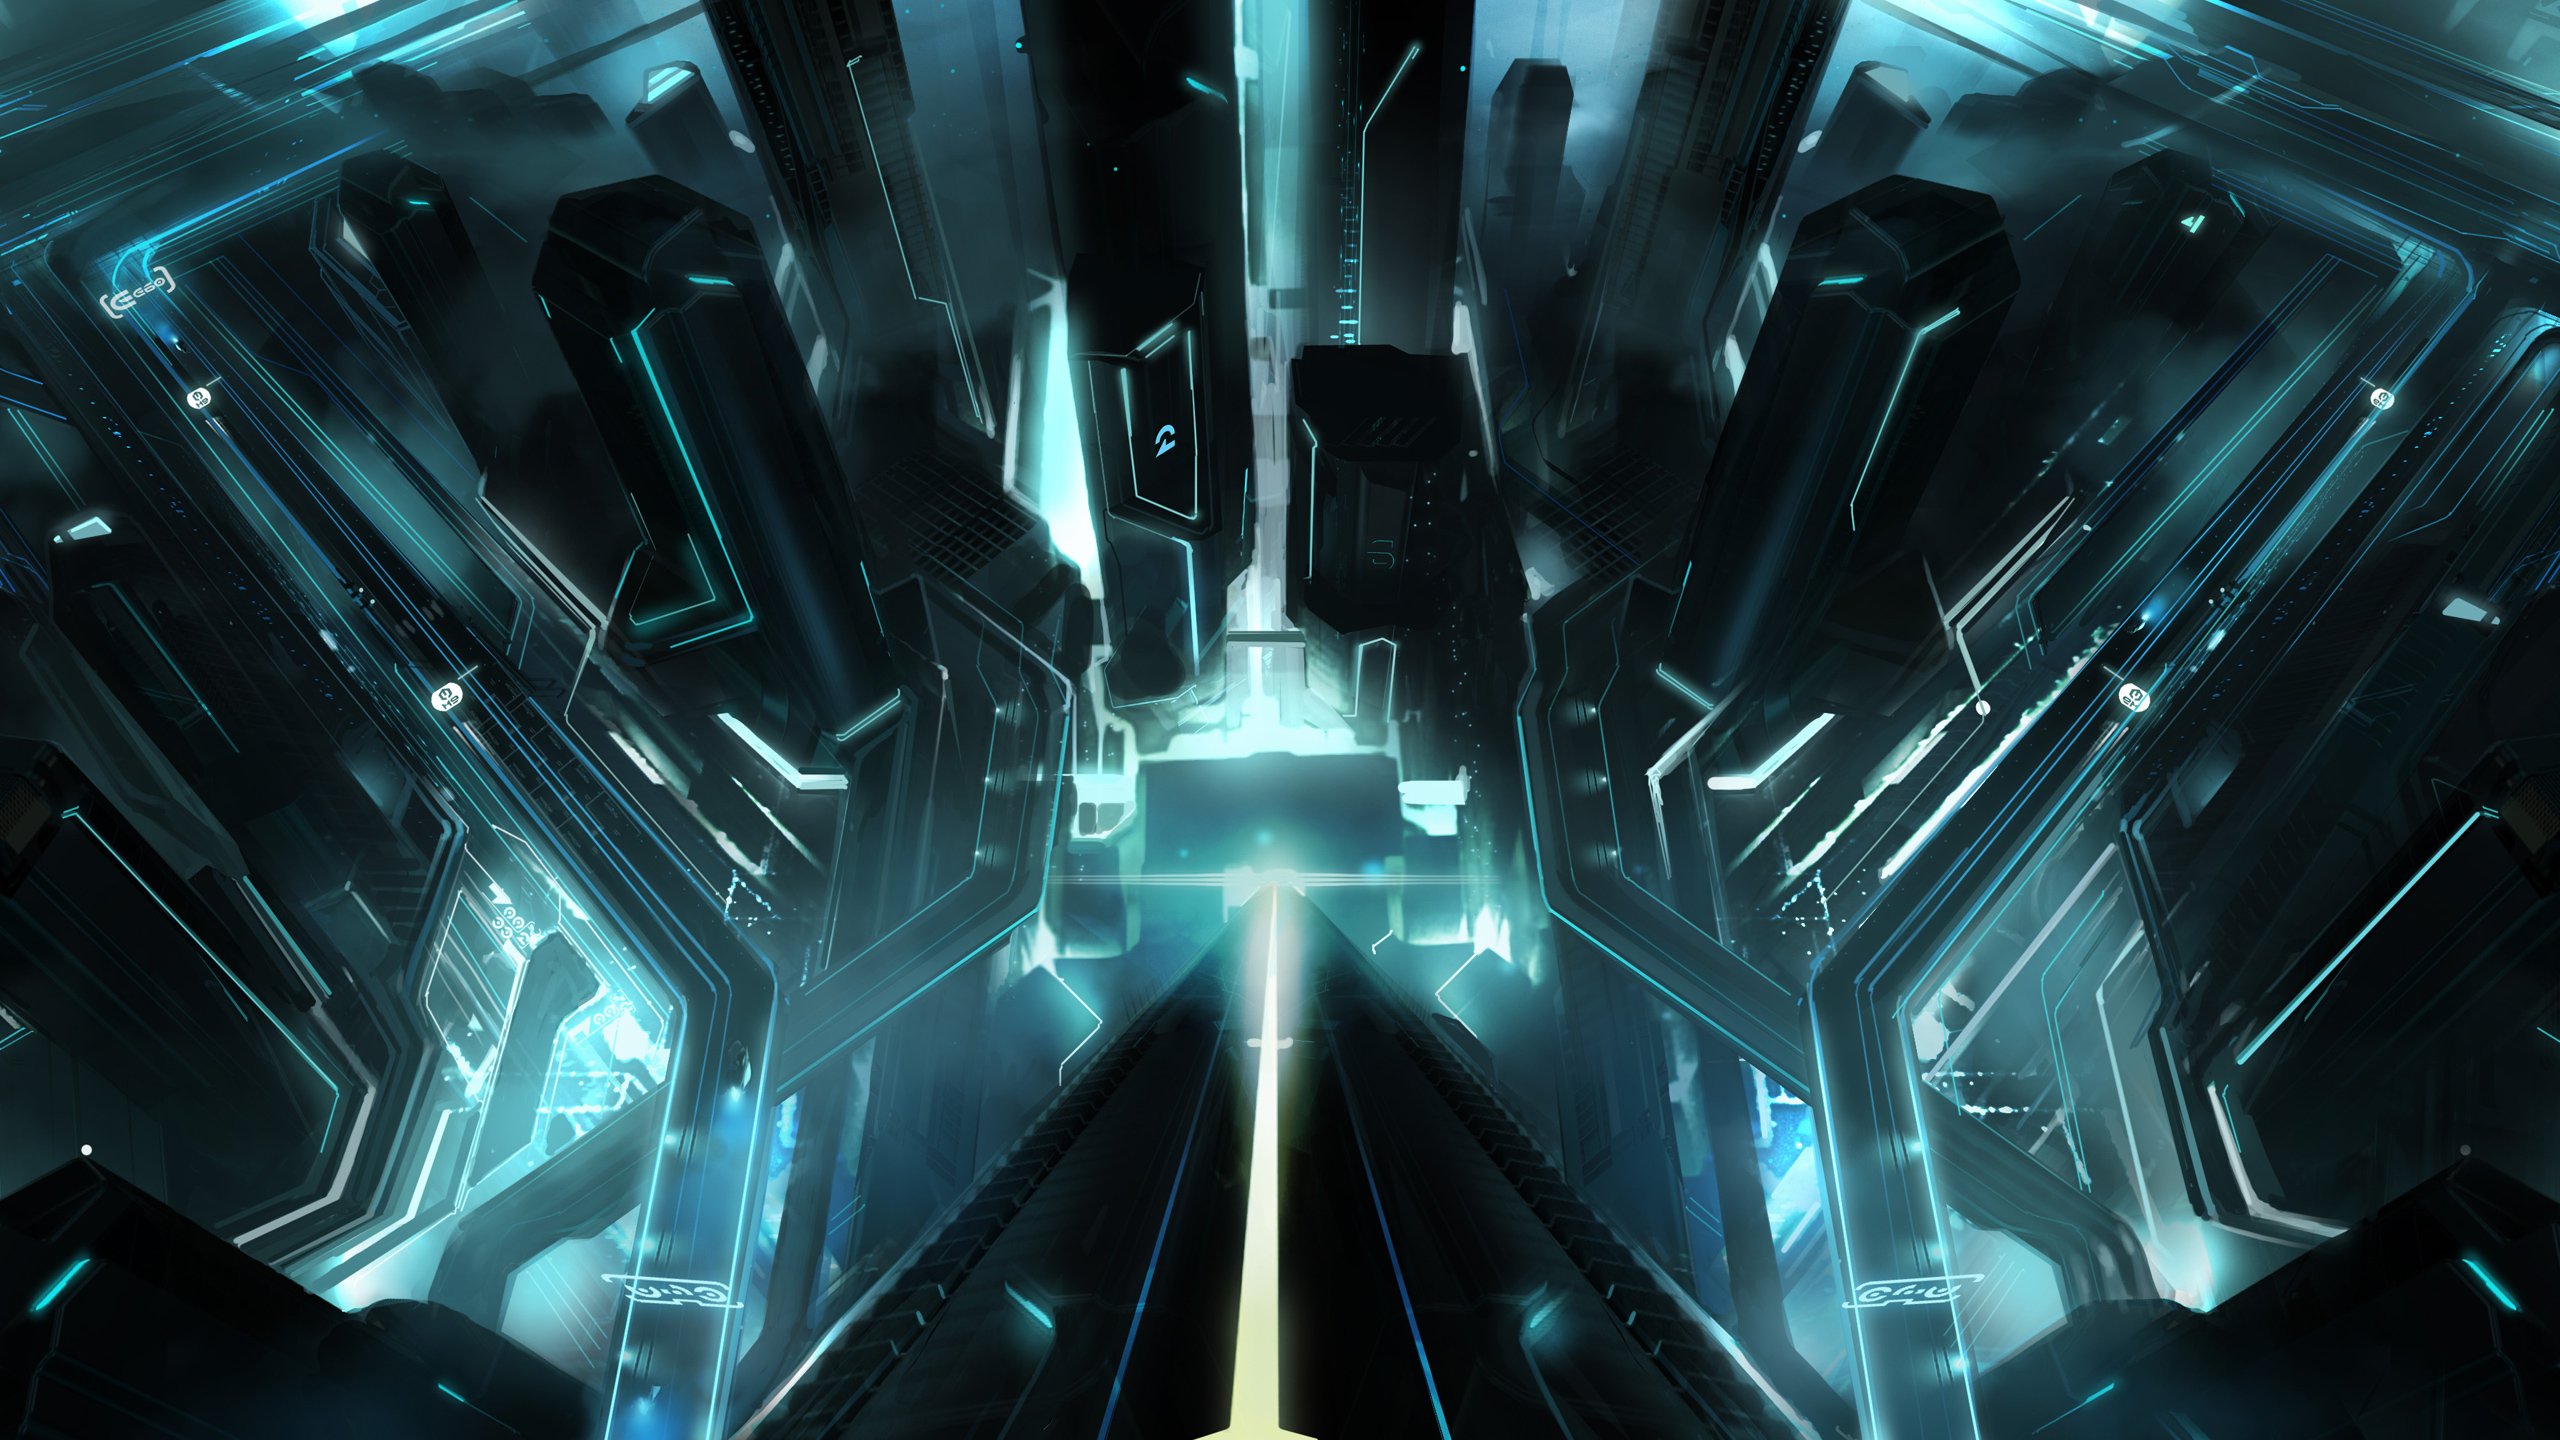 Tron City Wallpapers HD Wallpapers 2560x1440